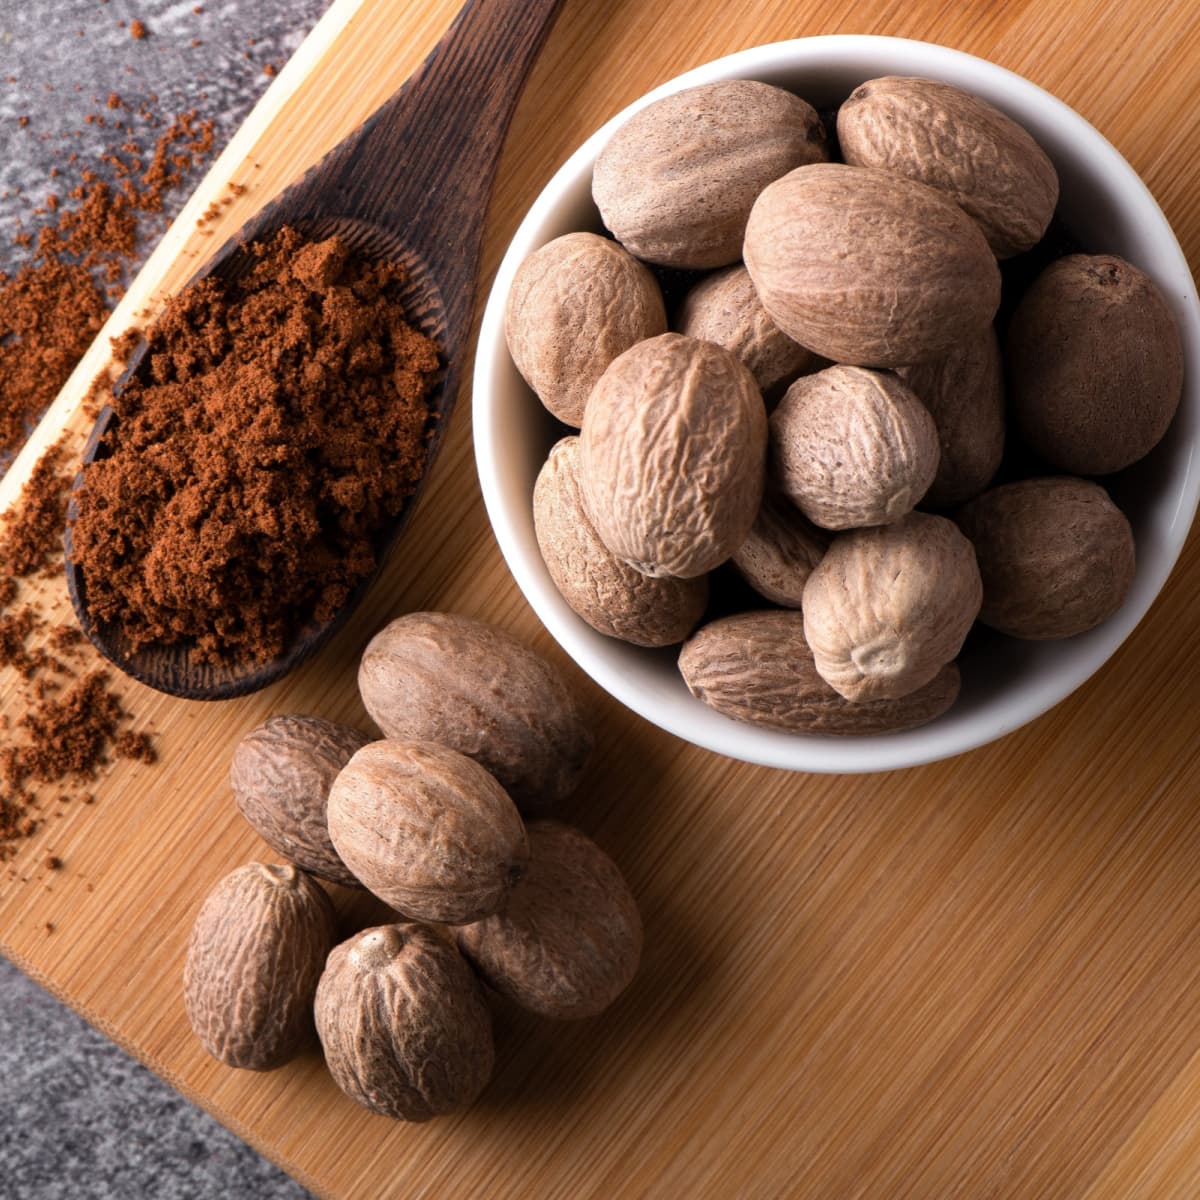 Whole Nutmeg in a White Bowl and Powdered Nutmeg in a Wooden Spoon on A Wooden Plate